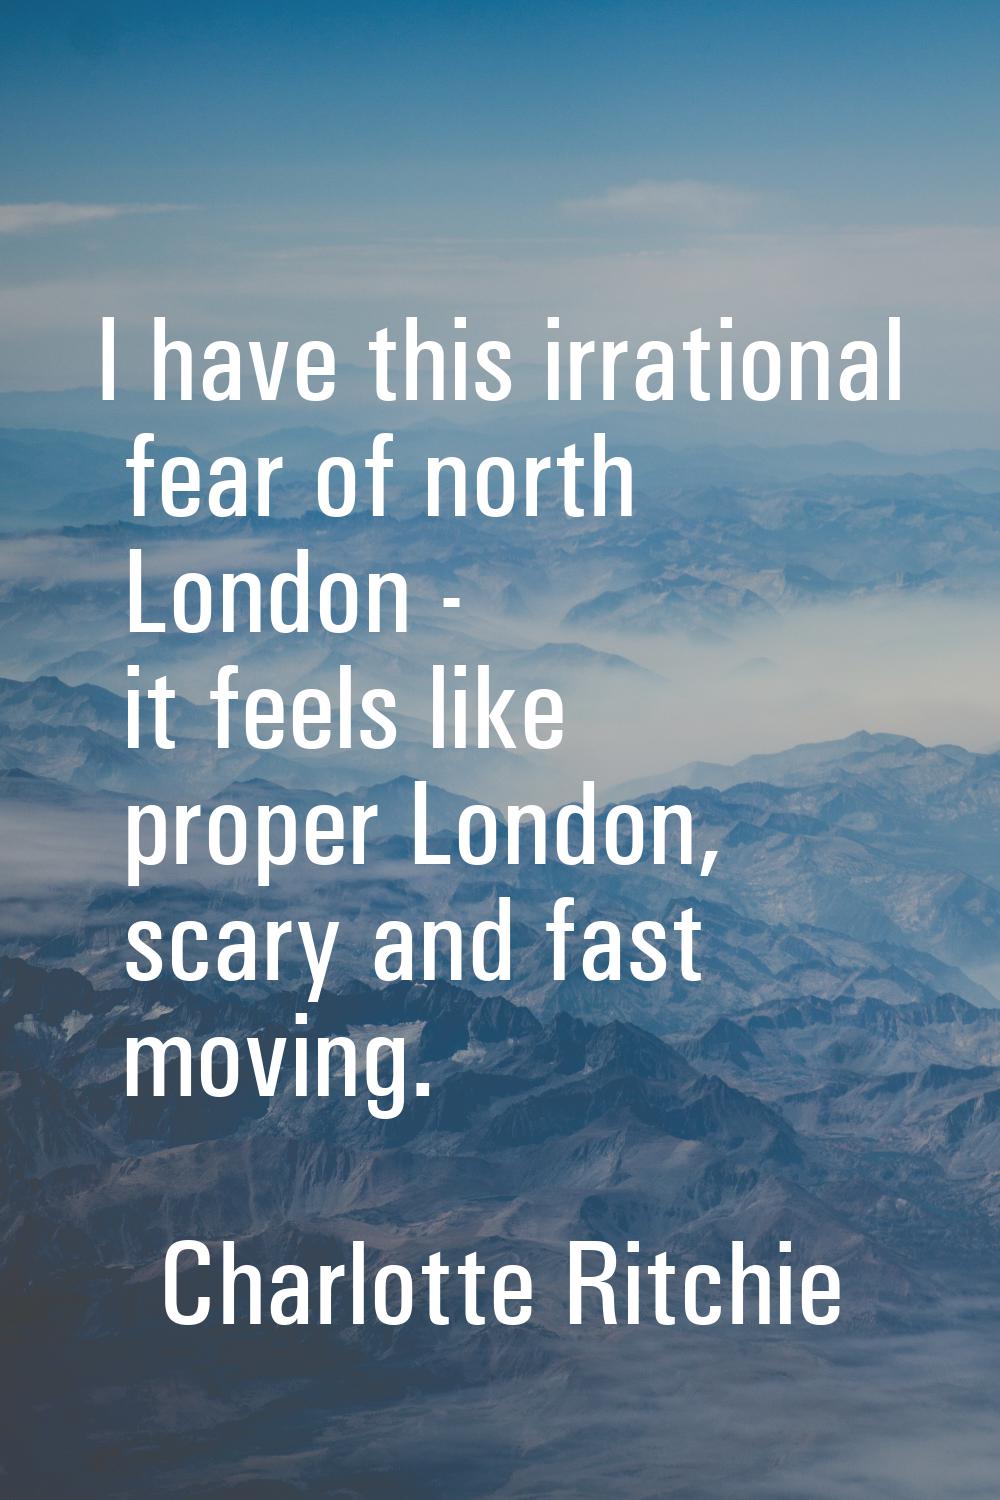 I have this irrational fear of north London - it feels like proper London, scary and fast moving.